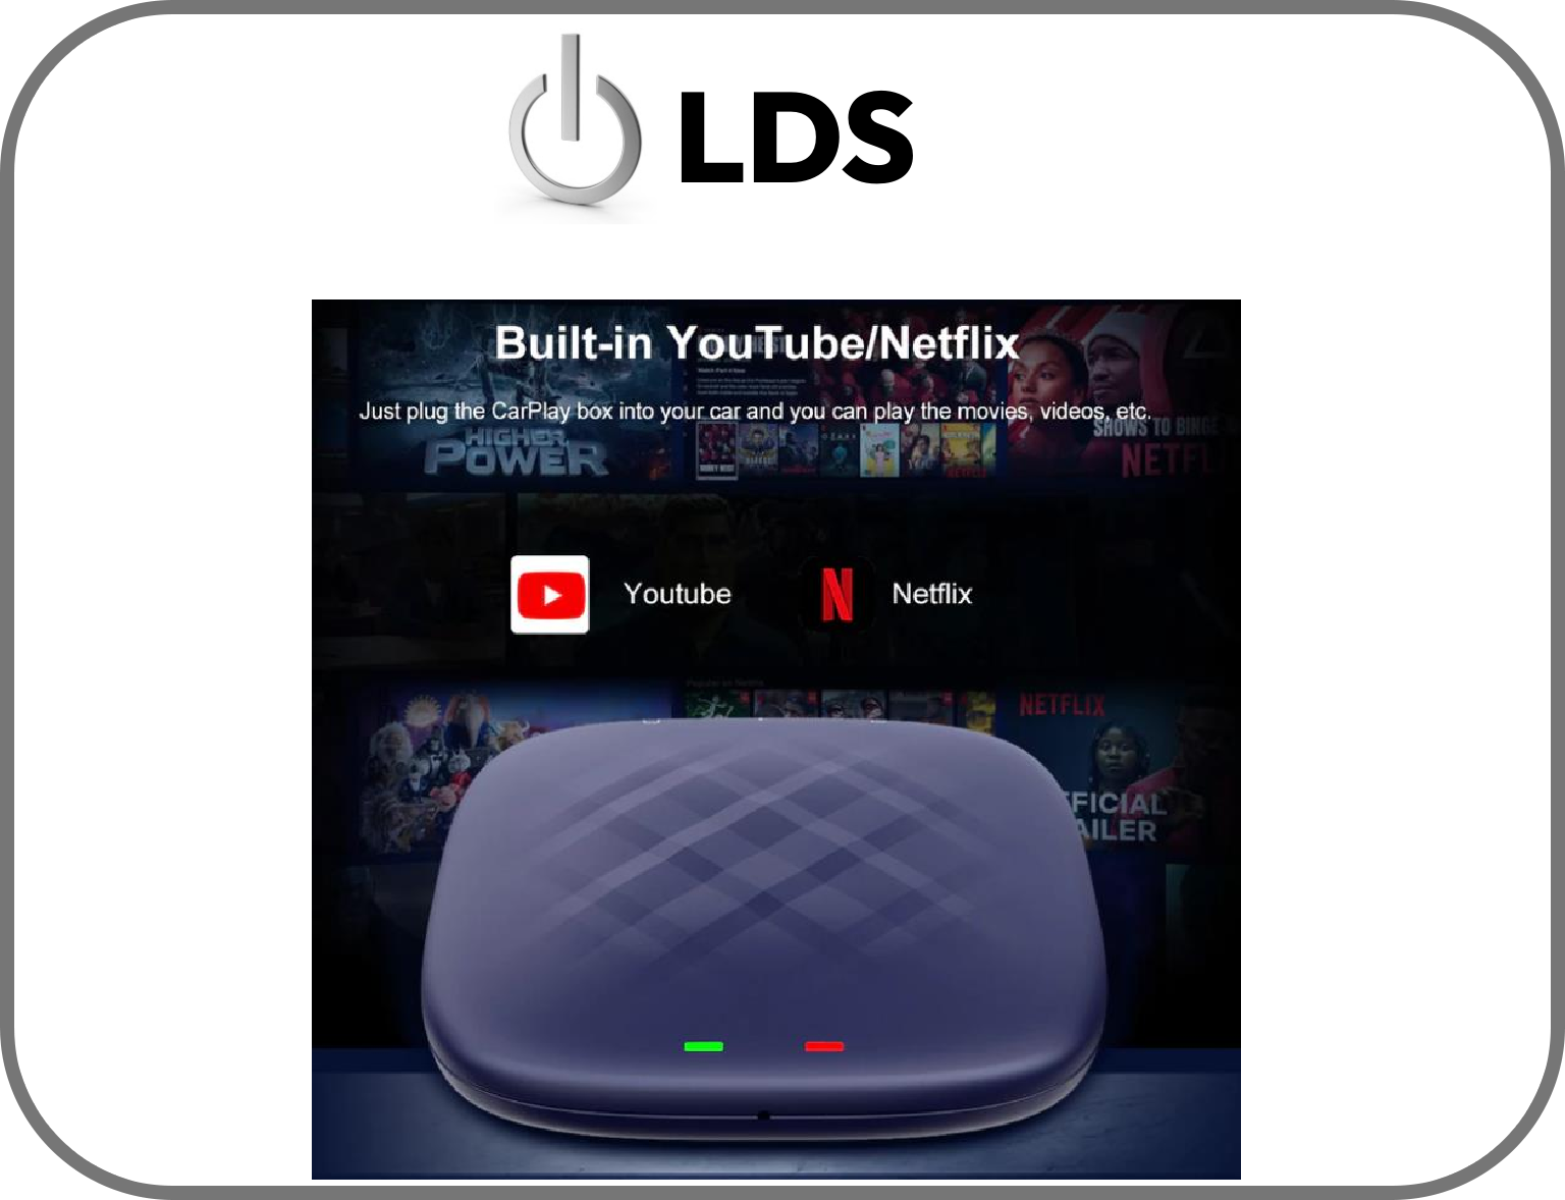 LDS EW-CPAndroidBOX Wireless CarPlay & Android Auto Dongle with Youtube and NETFLIX